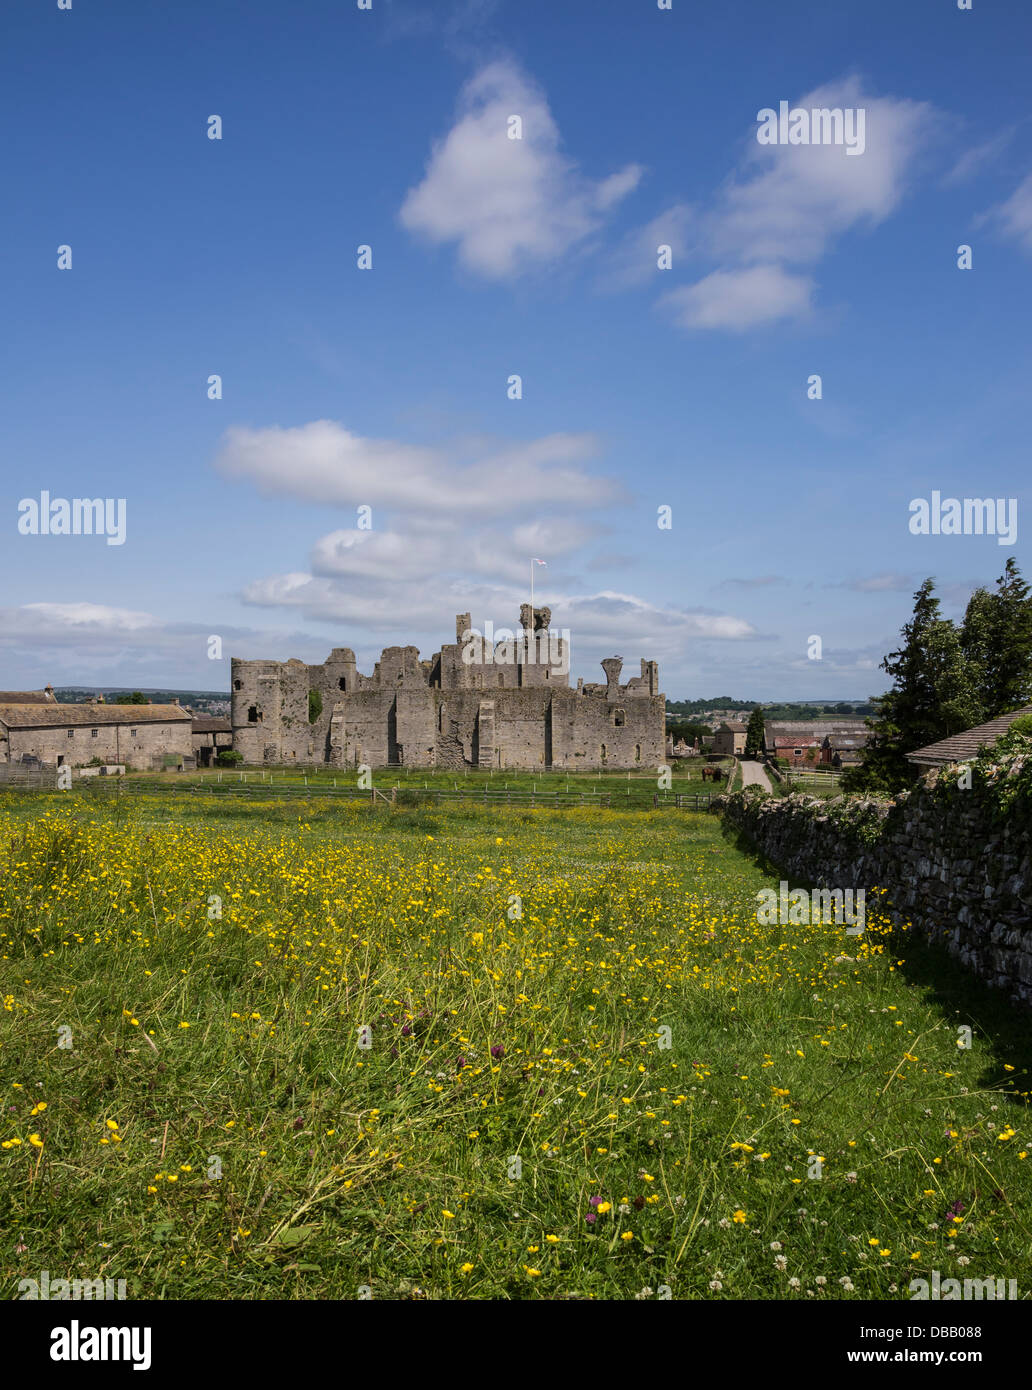 Middleham Castle, North Yorkshire. Image taken from outwith the site boundary. Stock Photo